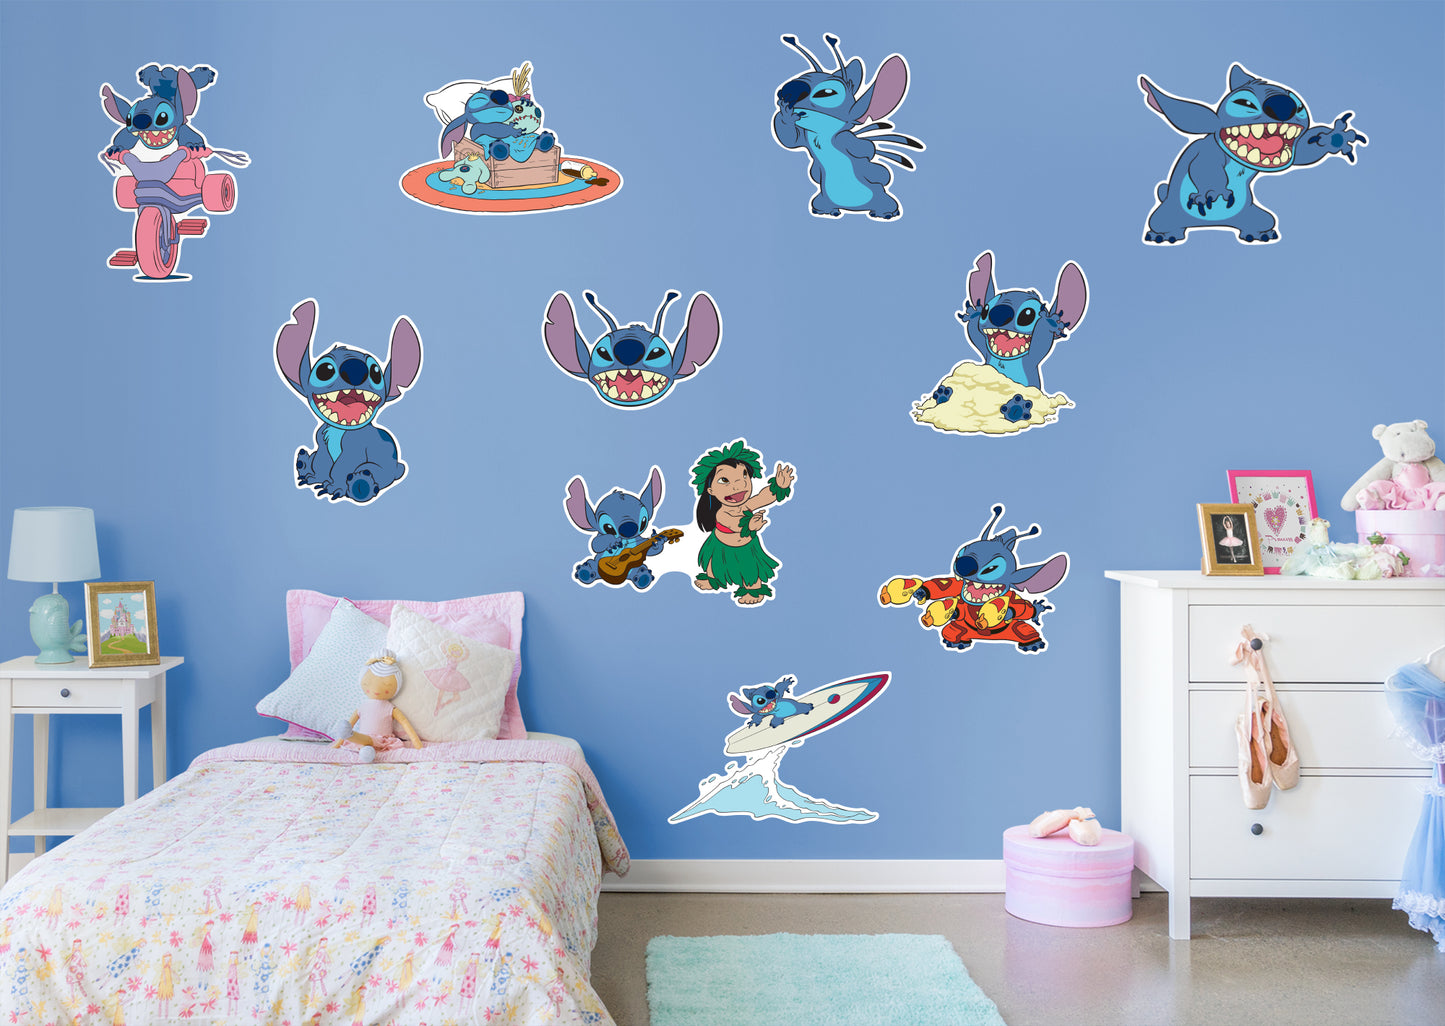 Lilo & Stitch: Stitch Collection - Officially Licensed Disney Removable Adhesive Decal